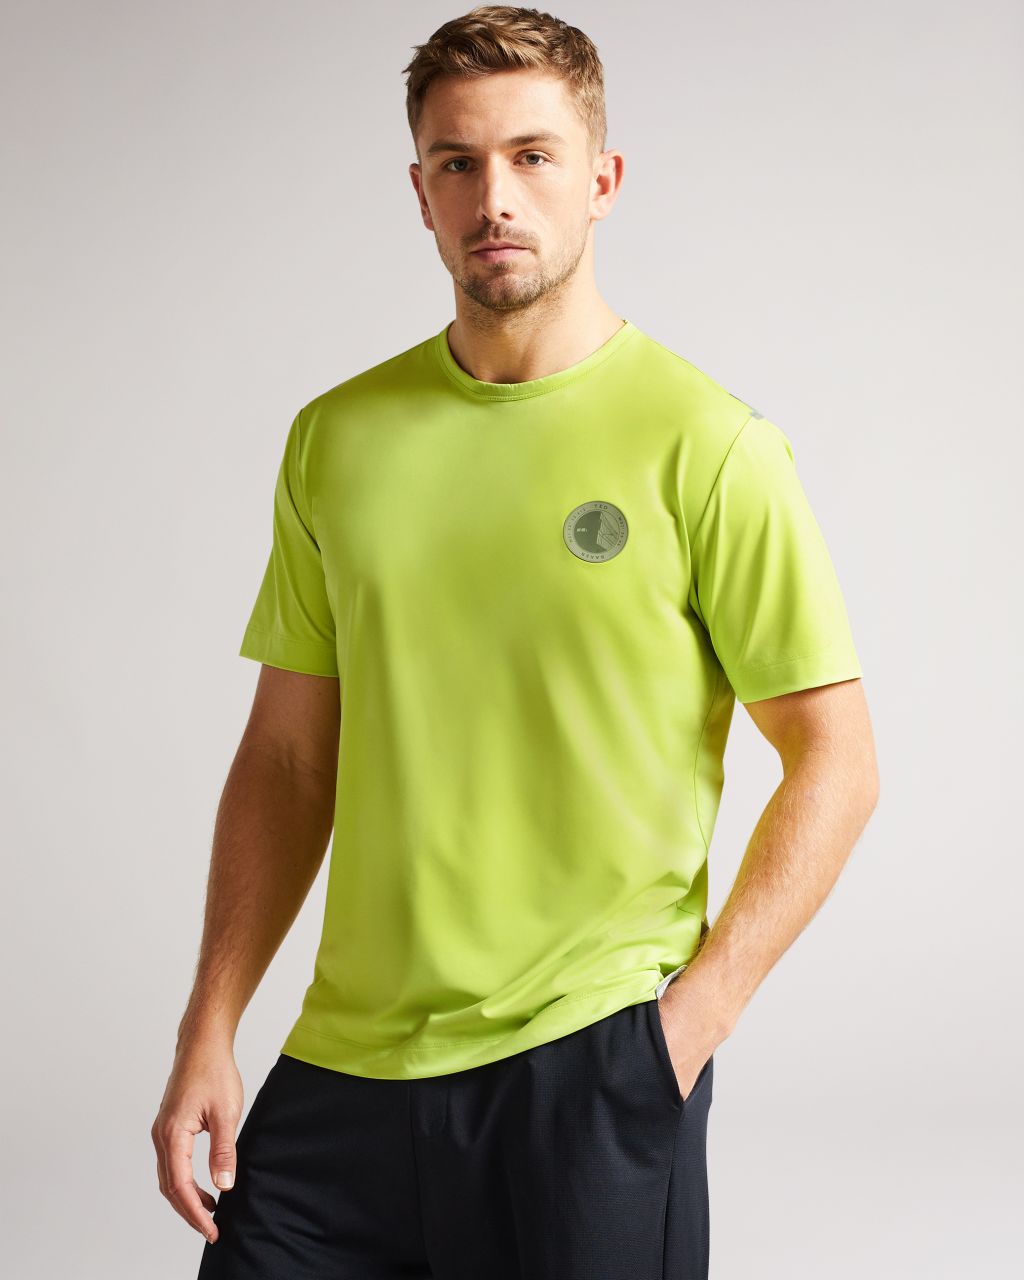 Ted Baker Men's Short Sleeve Active Quick Dry T Shirt in Lime, Roding